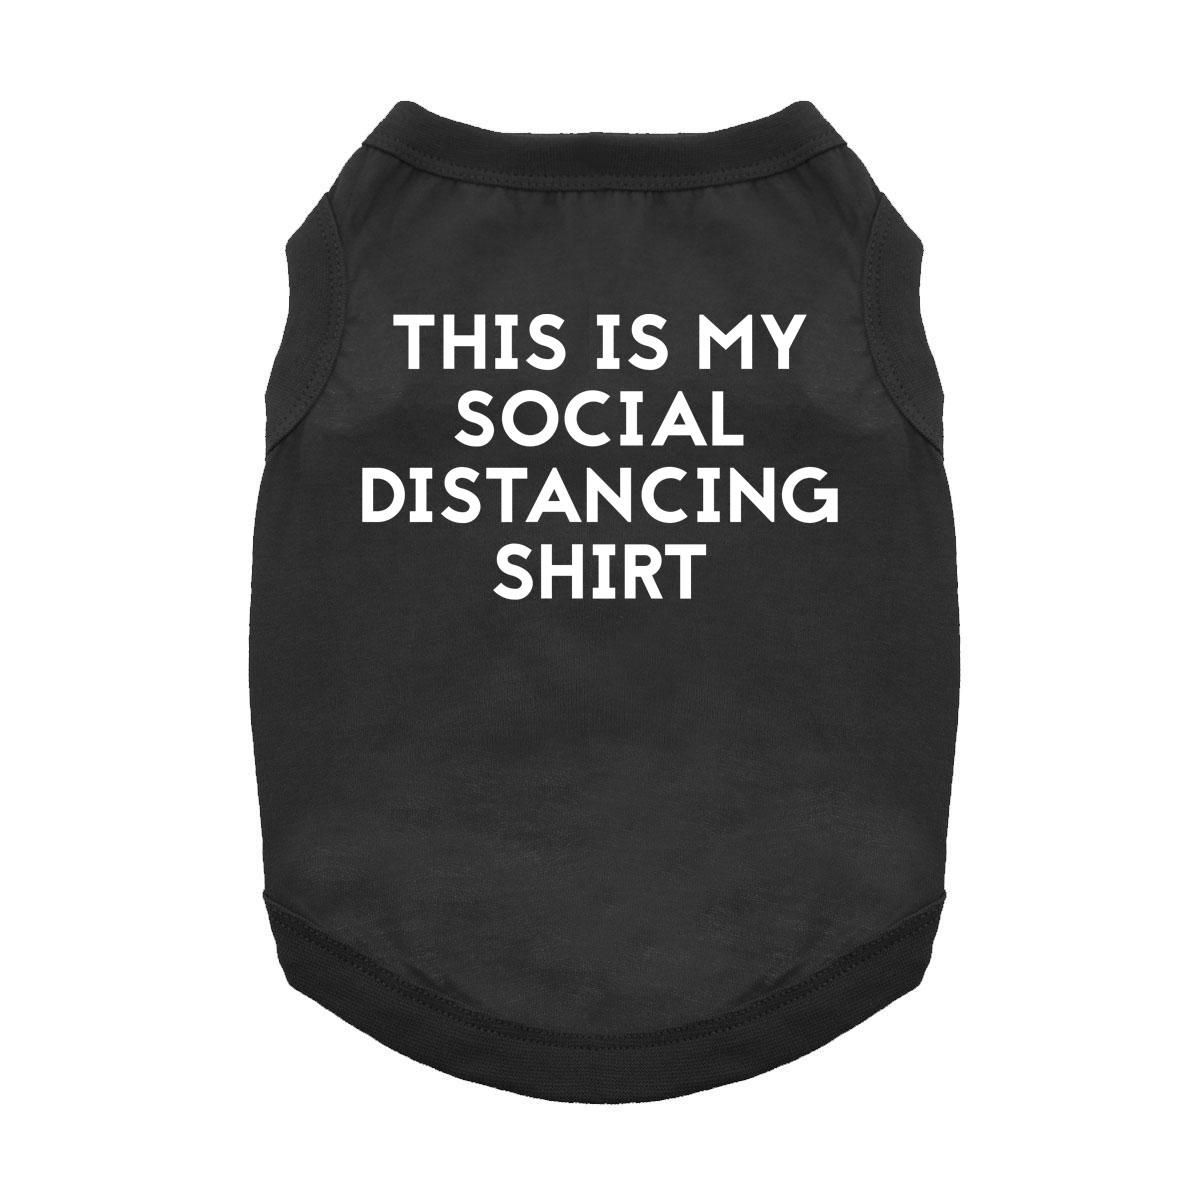 This is My Social Distancing Dog and Cat Shirt - Black